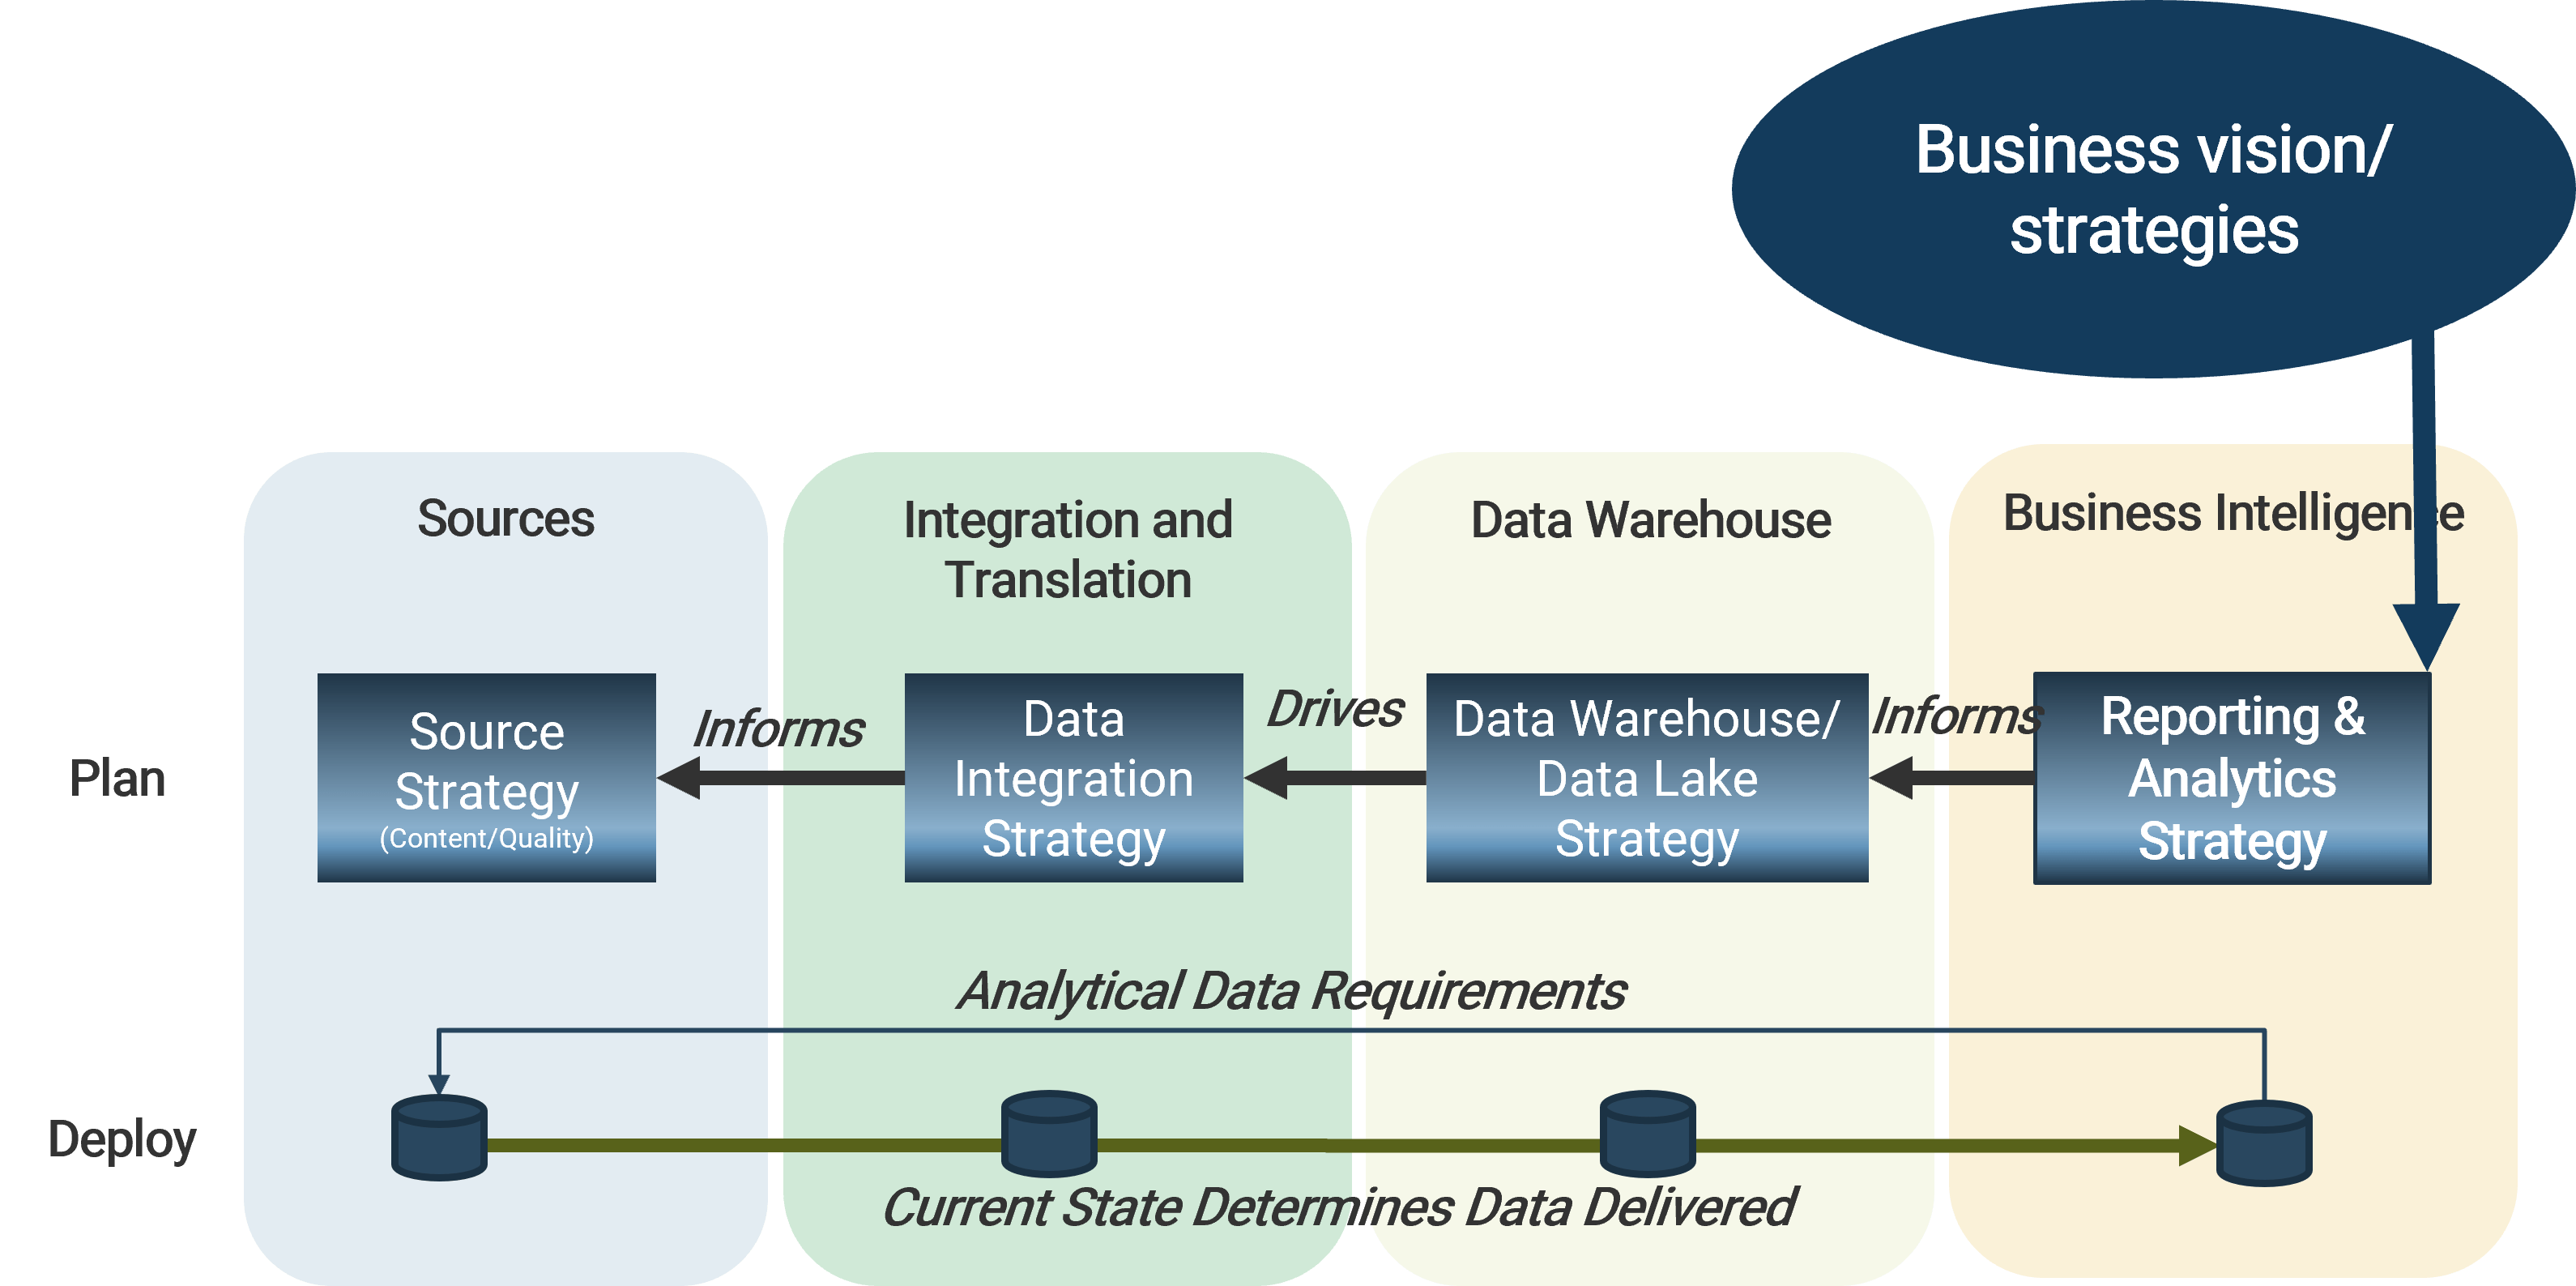 A diagram of the 'Reporting and Analytics Framework' with 'Business vision/strategies' fed through four stages beginning with 'Business Intelligence: Reporting & Analytics Strategy', 'Data Warehouse: Data Warehouse/ Data Lake Strategy', 'Integration and Translation: Data Integration Strategy', 'Sources: Source Strategy (Content/Quality)'